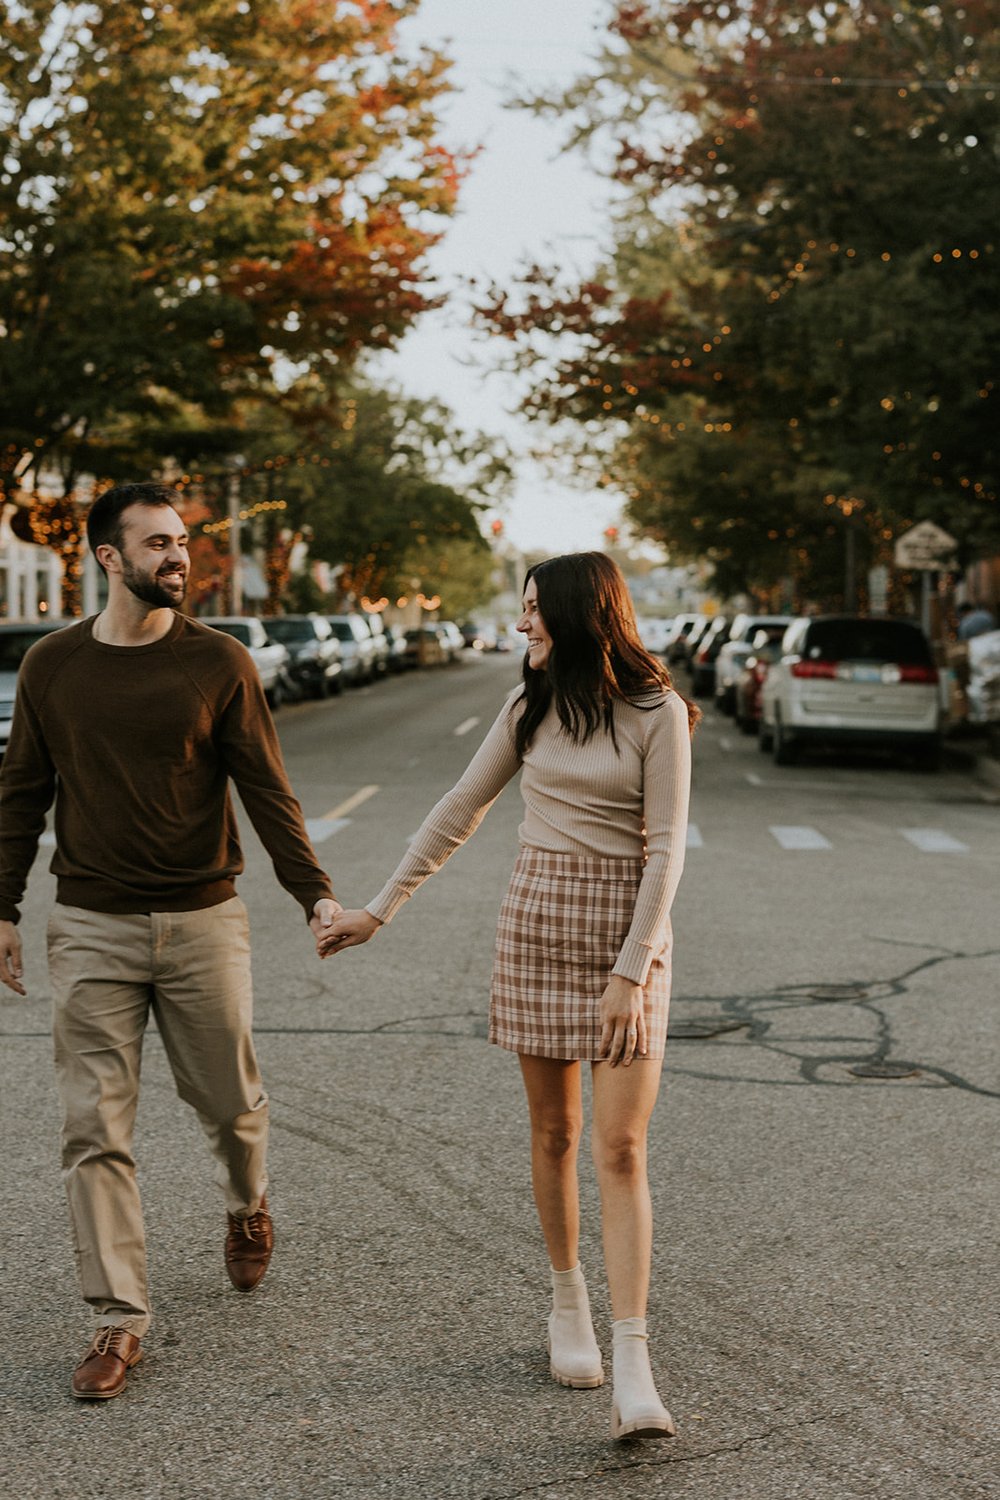  Trendy engagement photos outfits; if you’re wondering what to wear, look here for inspo on shoes and patterns. 